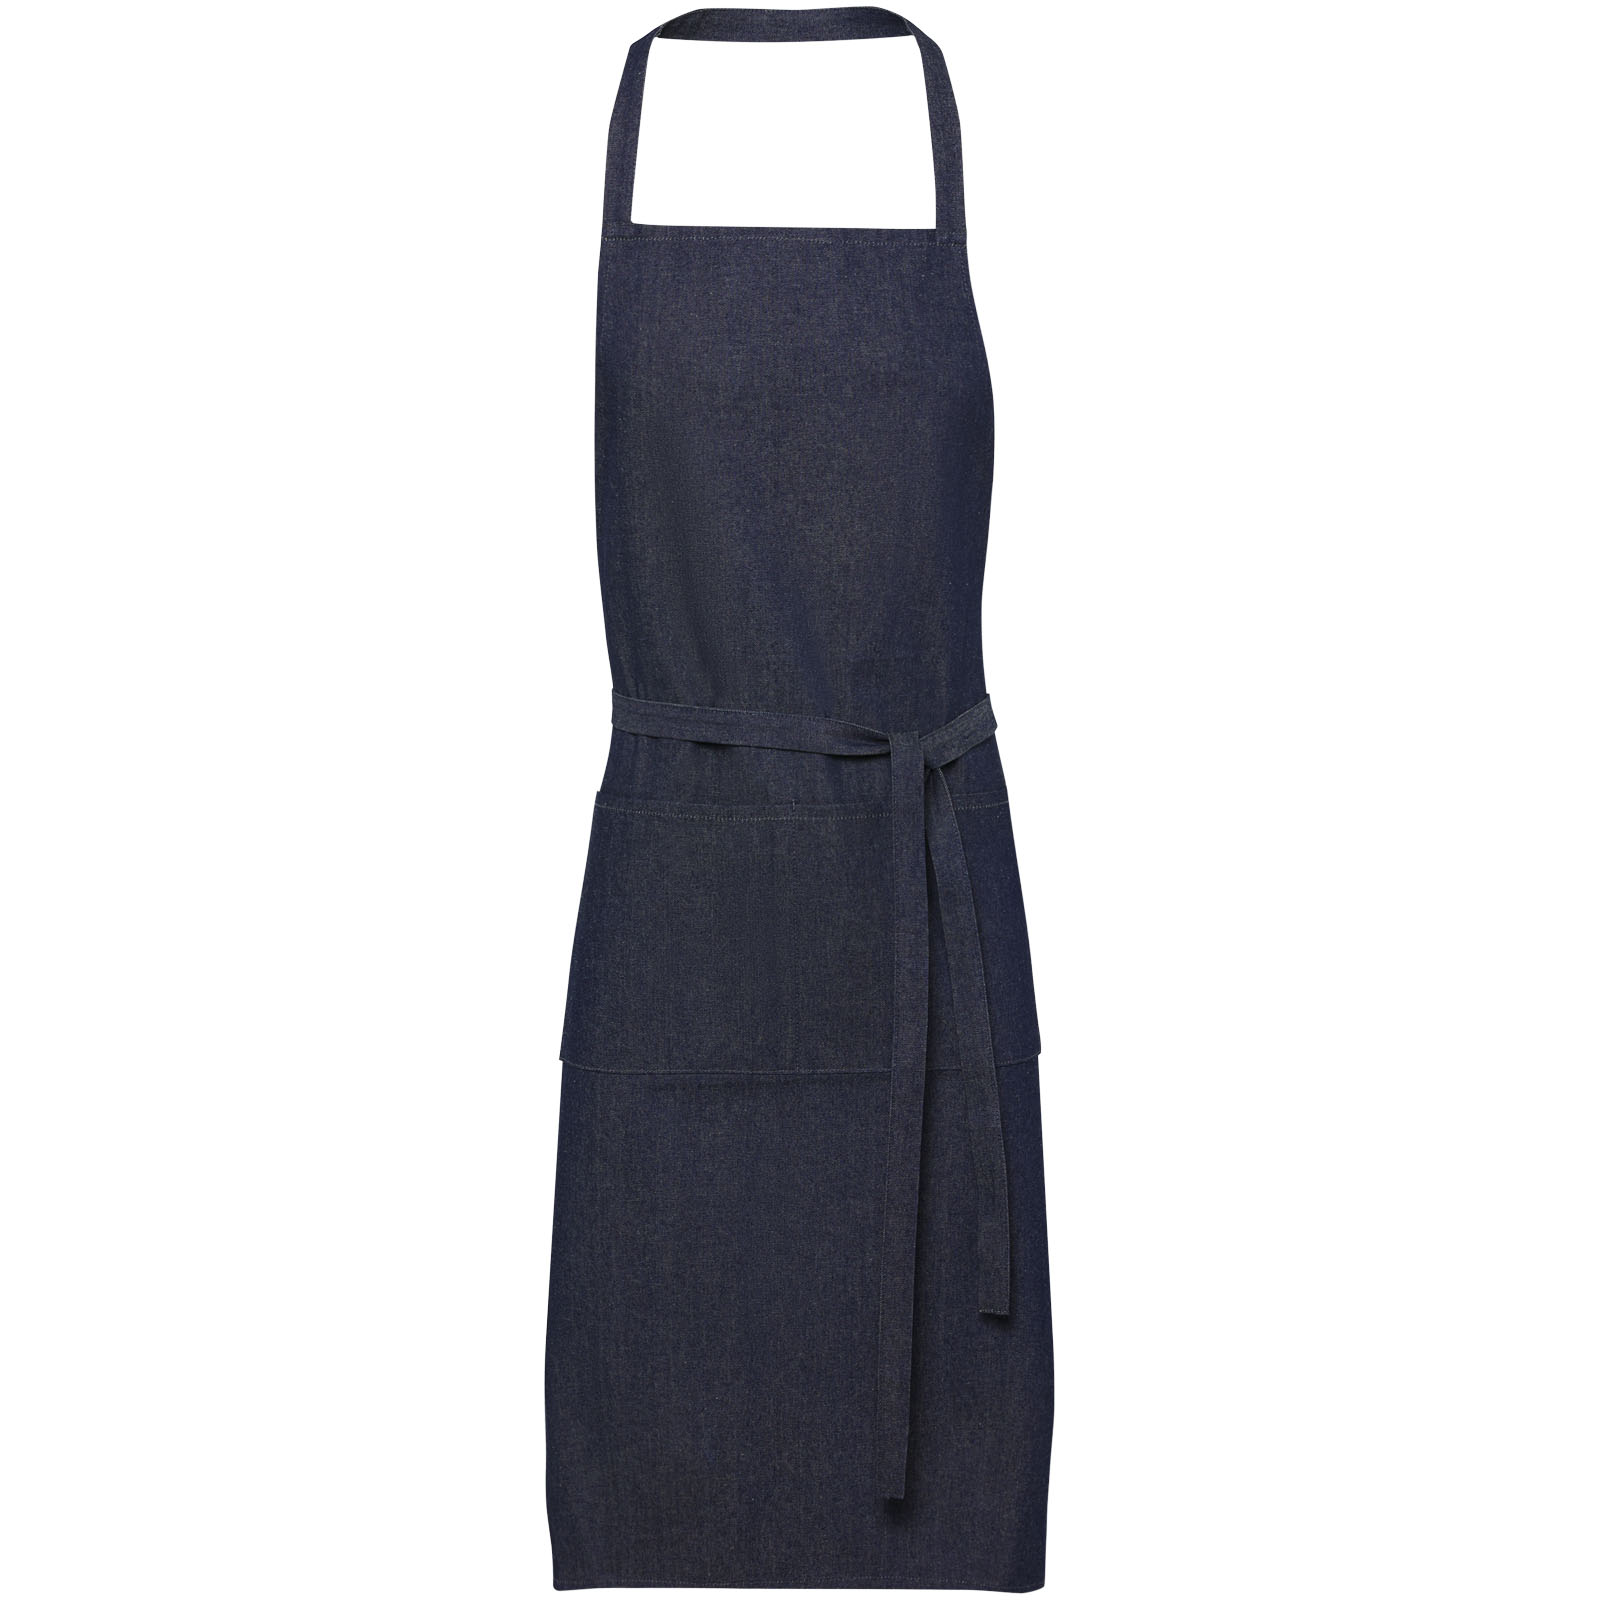 Home & Kitchen - Jeen 200 g/m² recycled denim apron